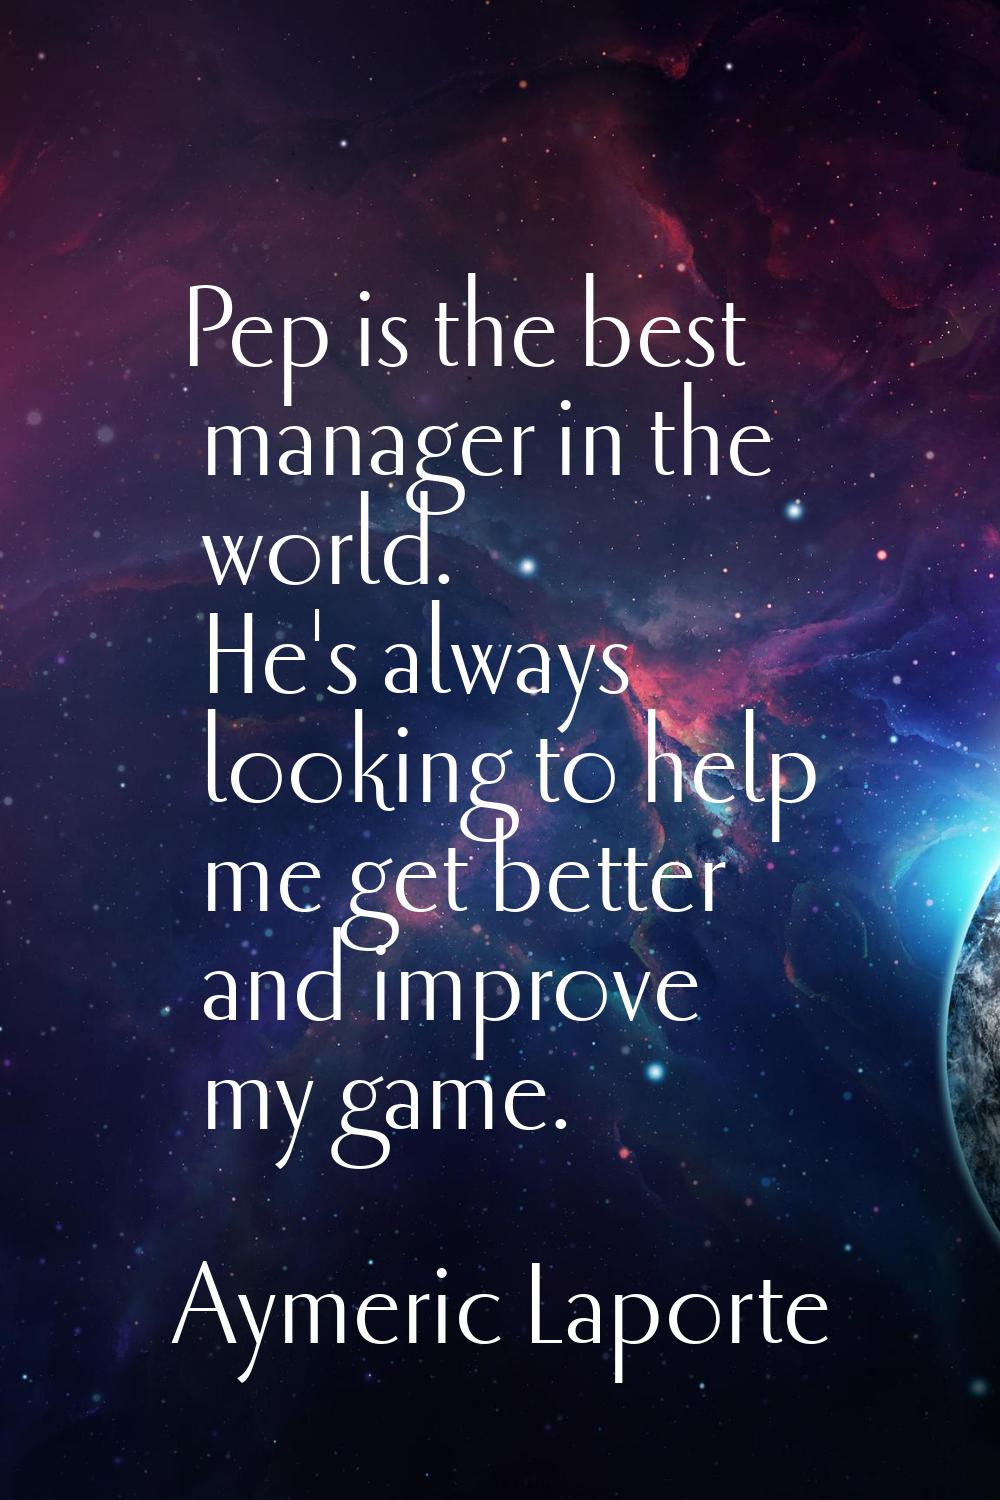 Pep is the best manager in the world. He's always looking to help me get better and improve my game